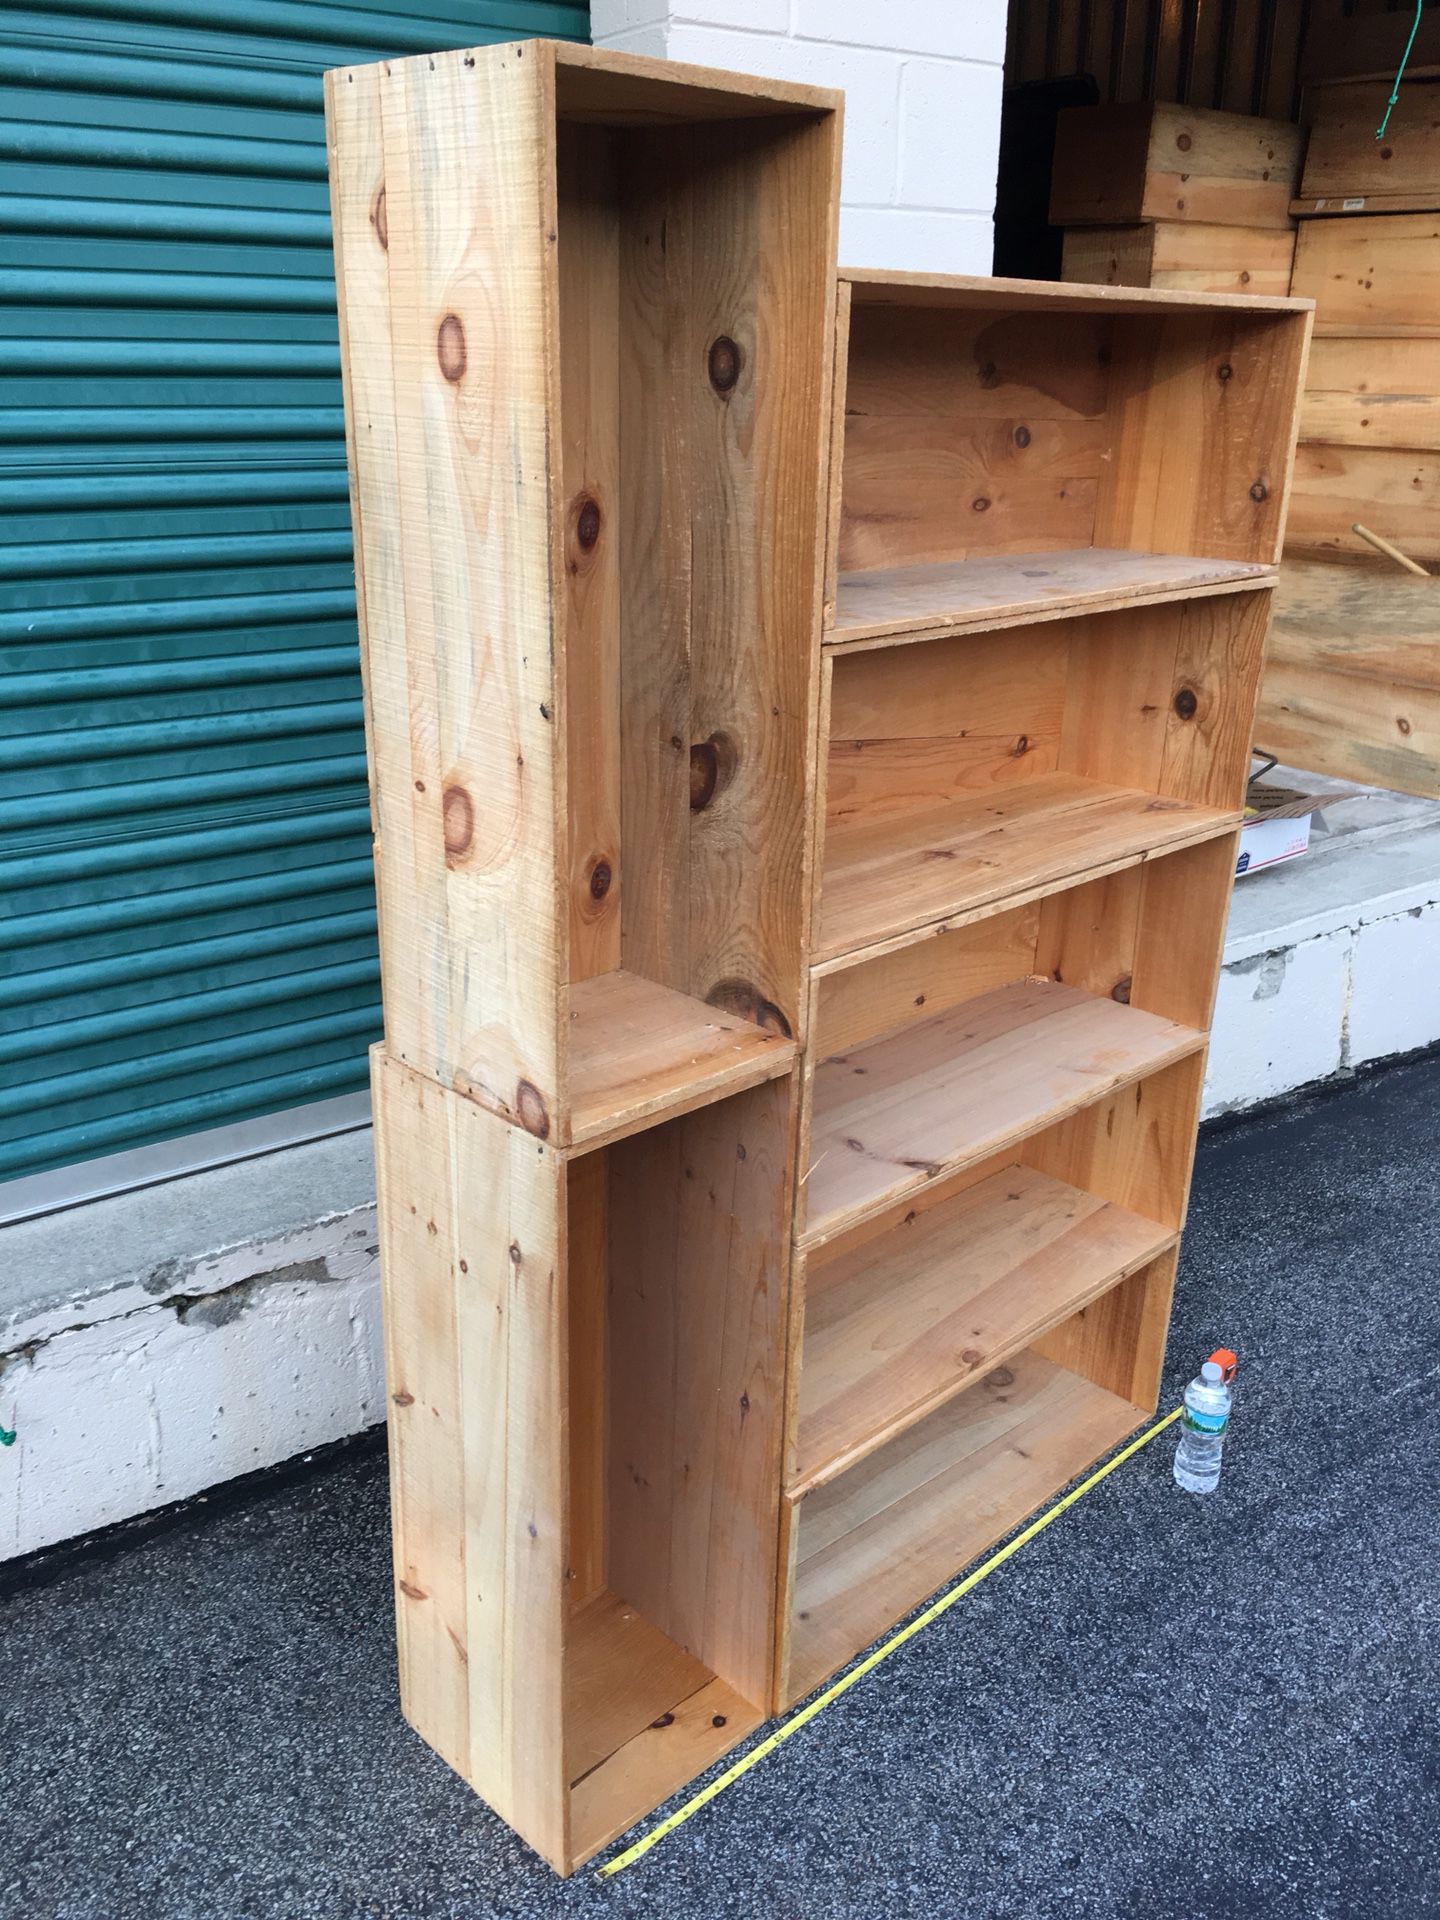 Solid wood rustic adjustable storage crates bookshelves. Lots of combinations $15 each crate